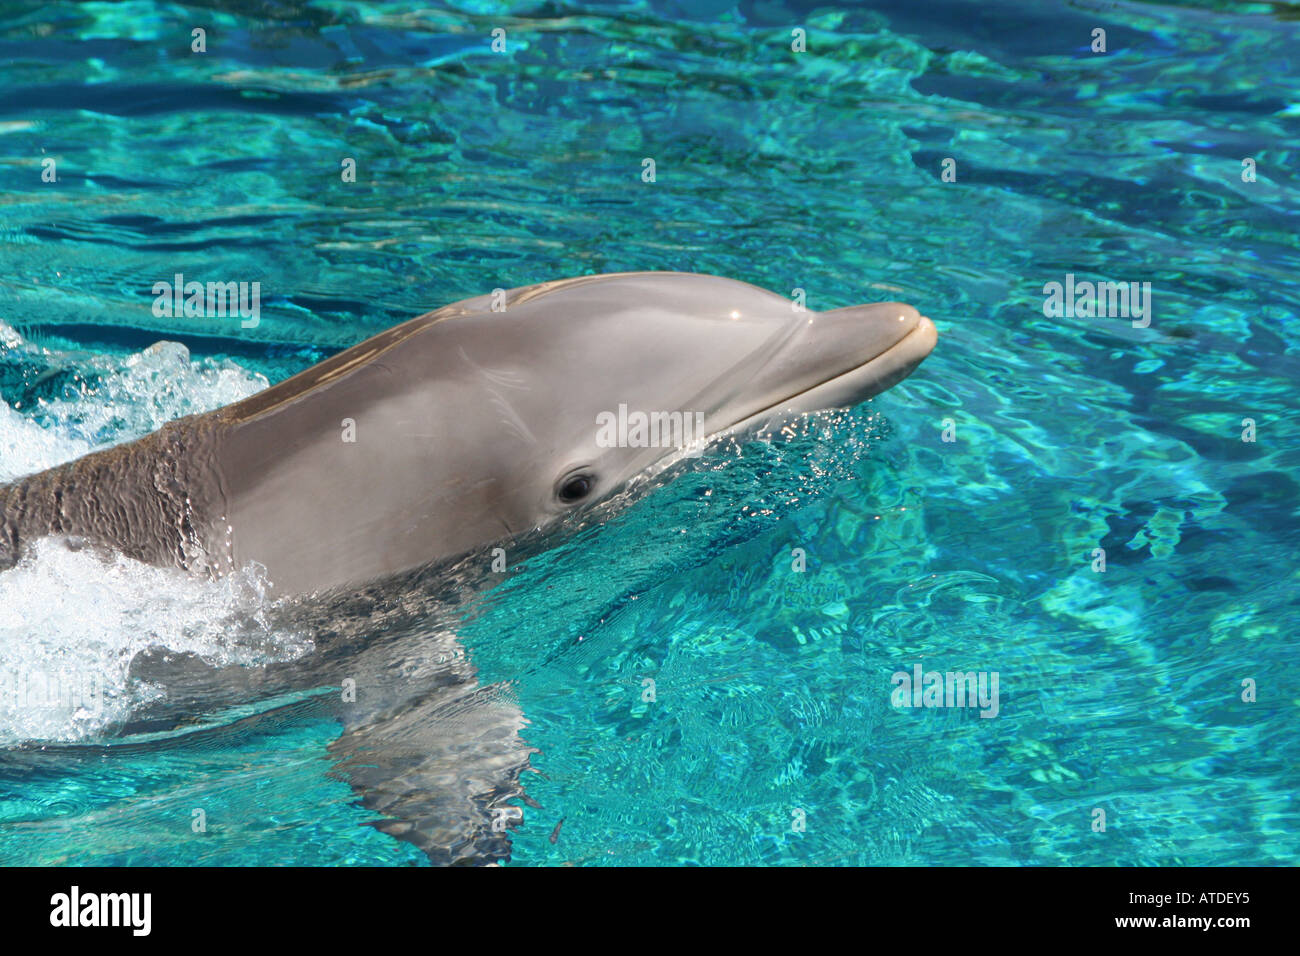 Dolphin swimming in a pool. Stock Photo